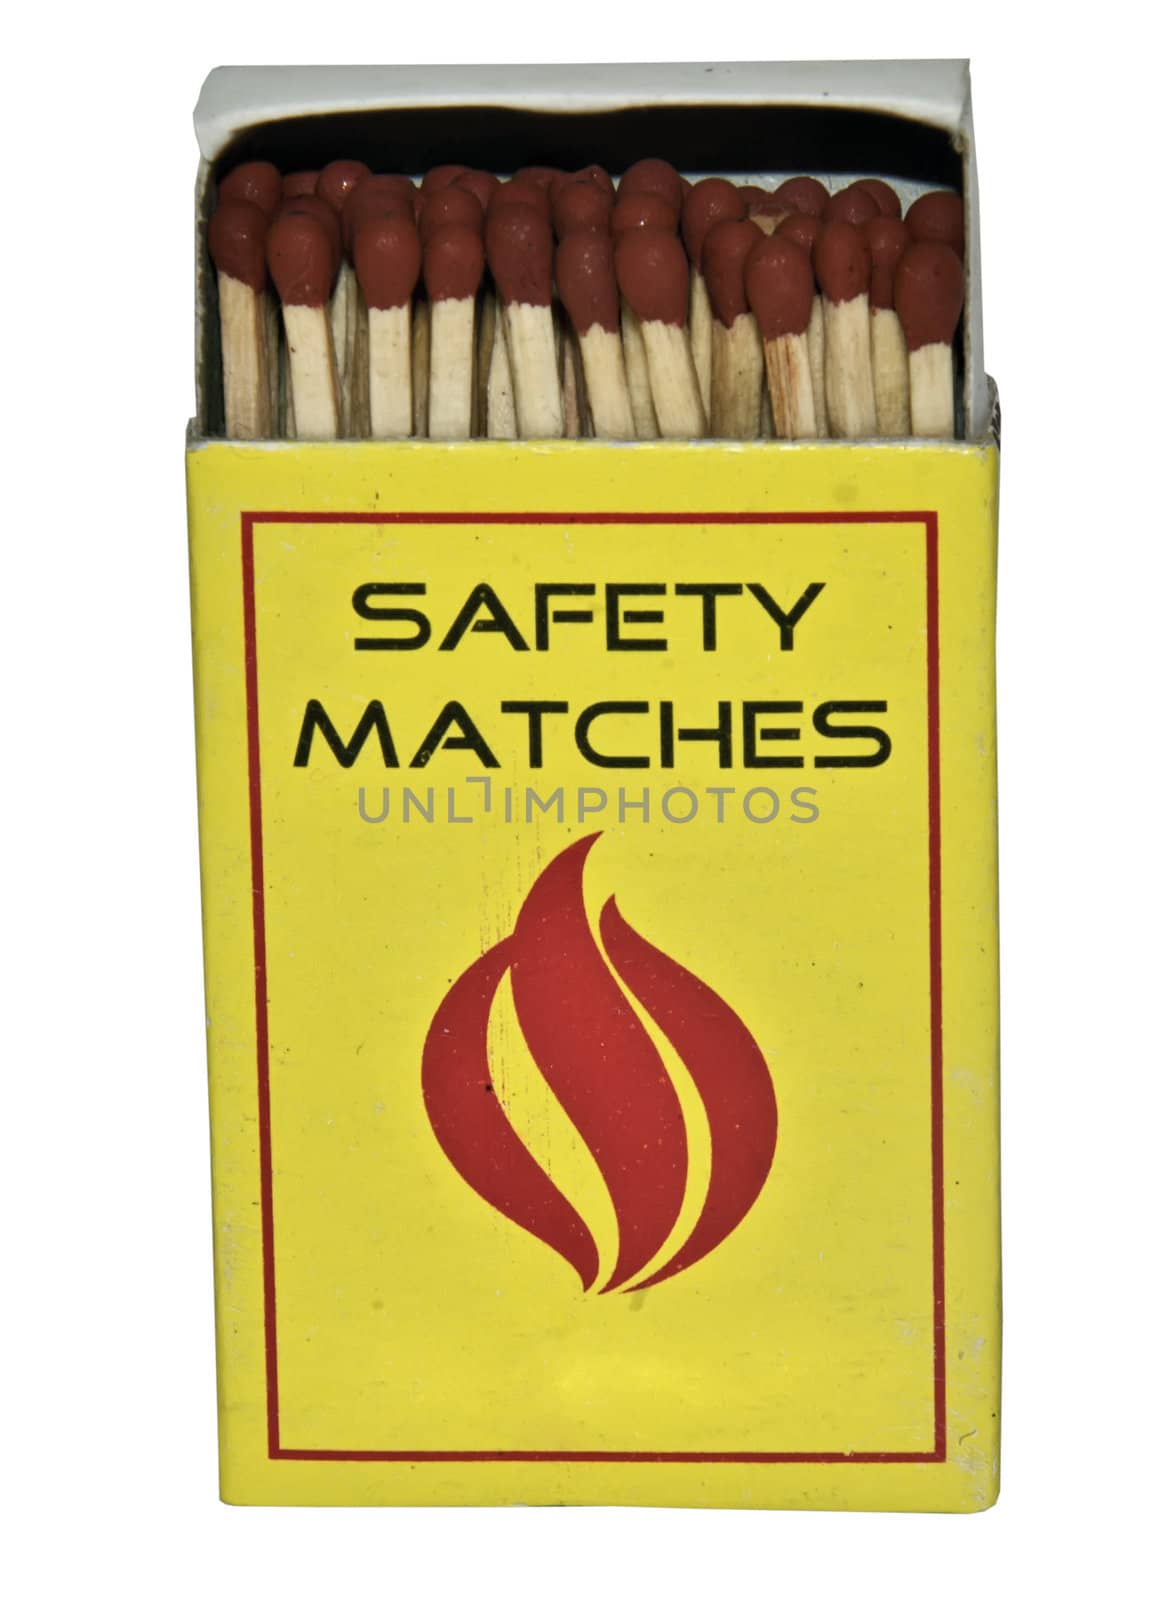 Isolated safety matches on white background